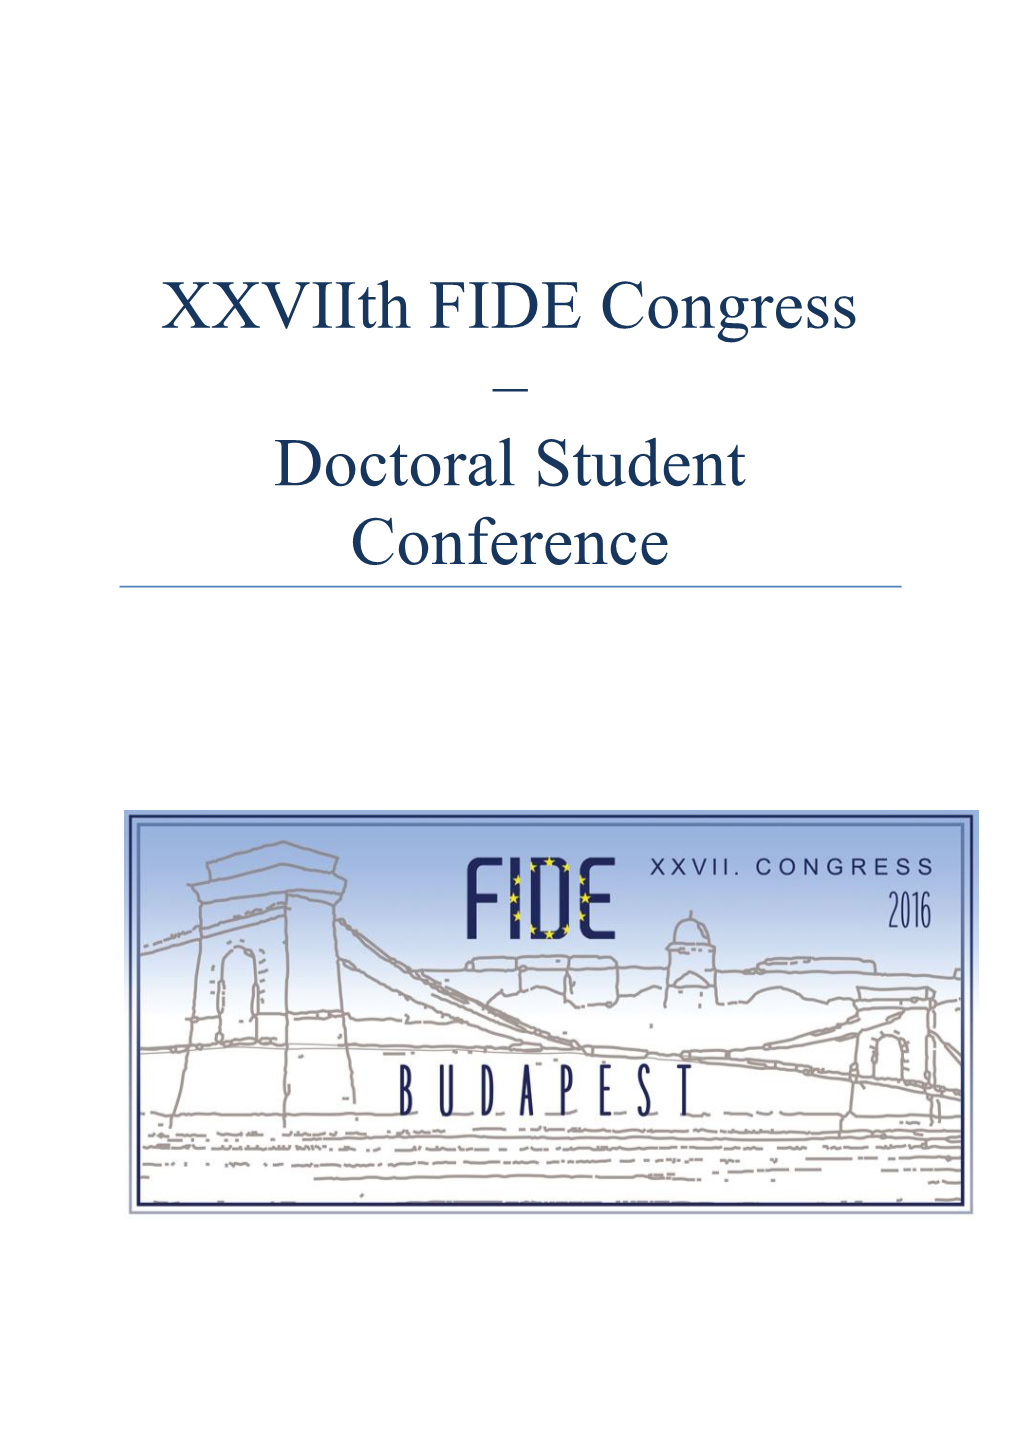 Xxviith FIDE Congress – Doctoral Student Conference